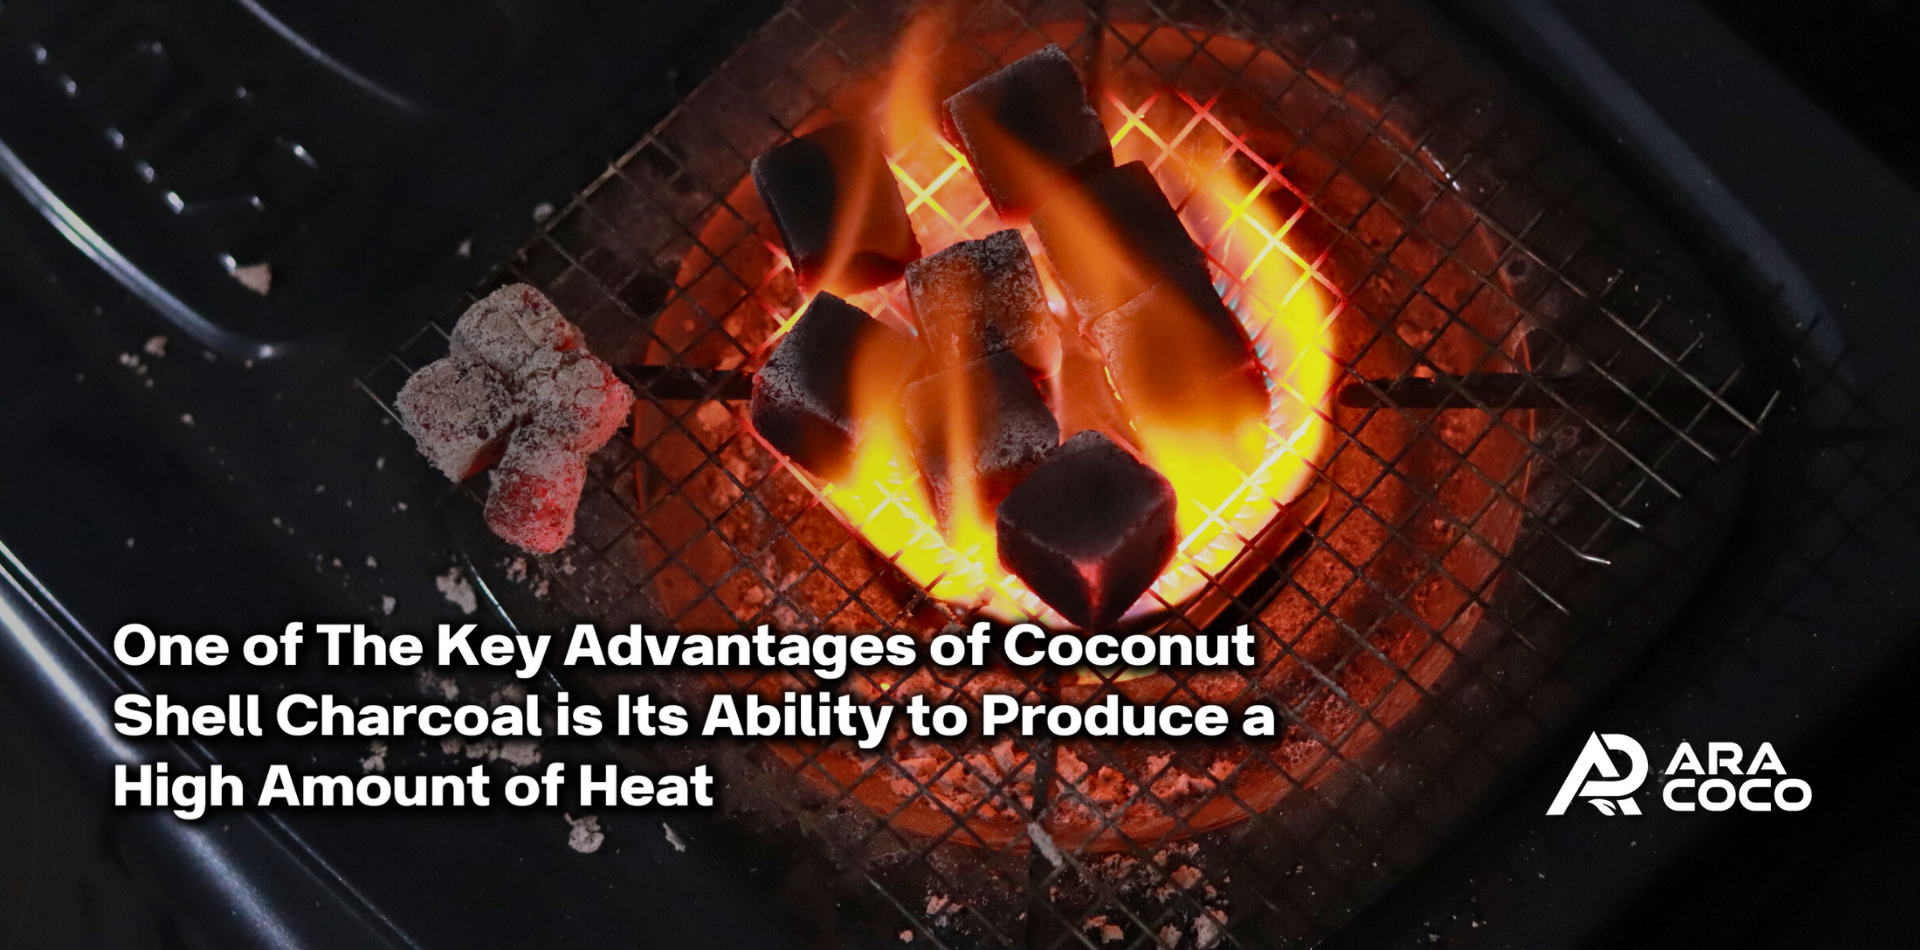 One of the key advantages of coconut shell charcoal is its ability to produce a high amount of heat.